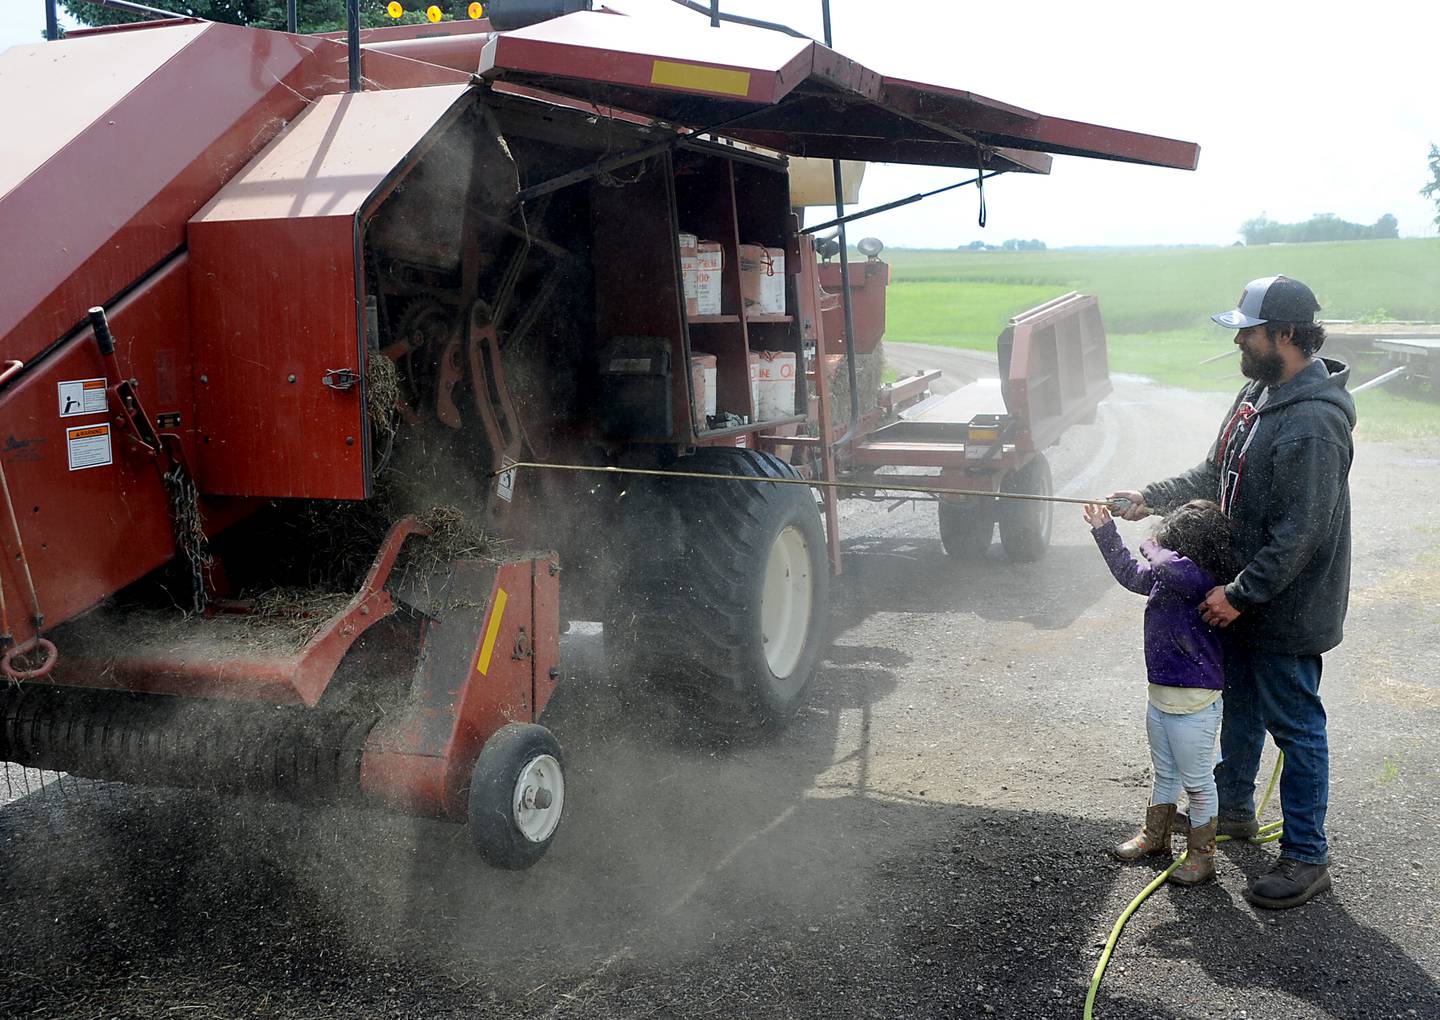 Raylee Kelly, 4, covers her eyes as he helps her dad, Bryon Kelly clean the baler Friday, June 10, 2022, on the Jacobson farm near Richmond. Kelly inherited the century-old farm from his step-grandfather Richard Jacobson.